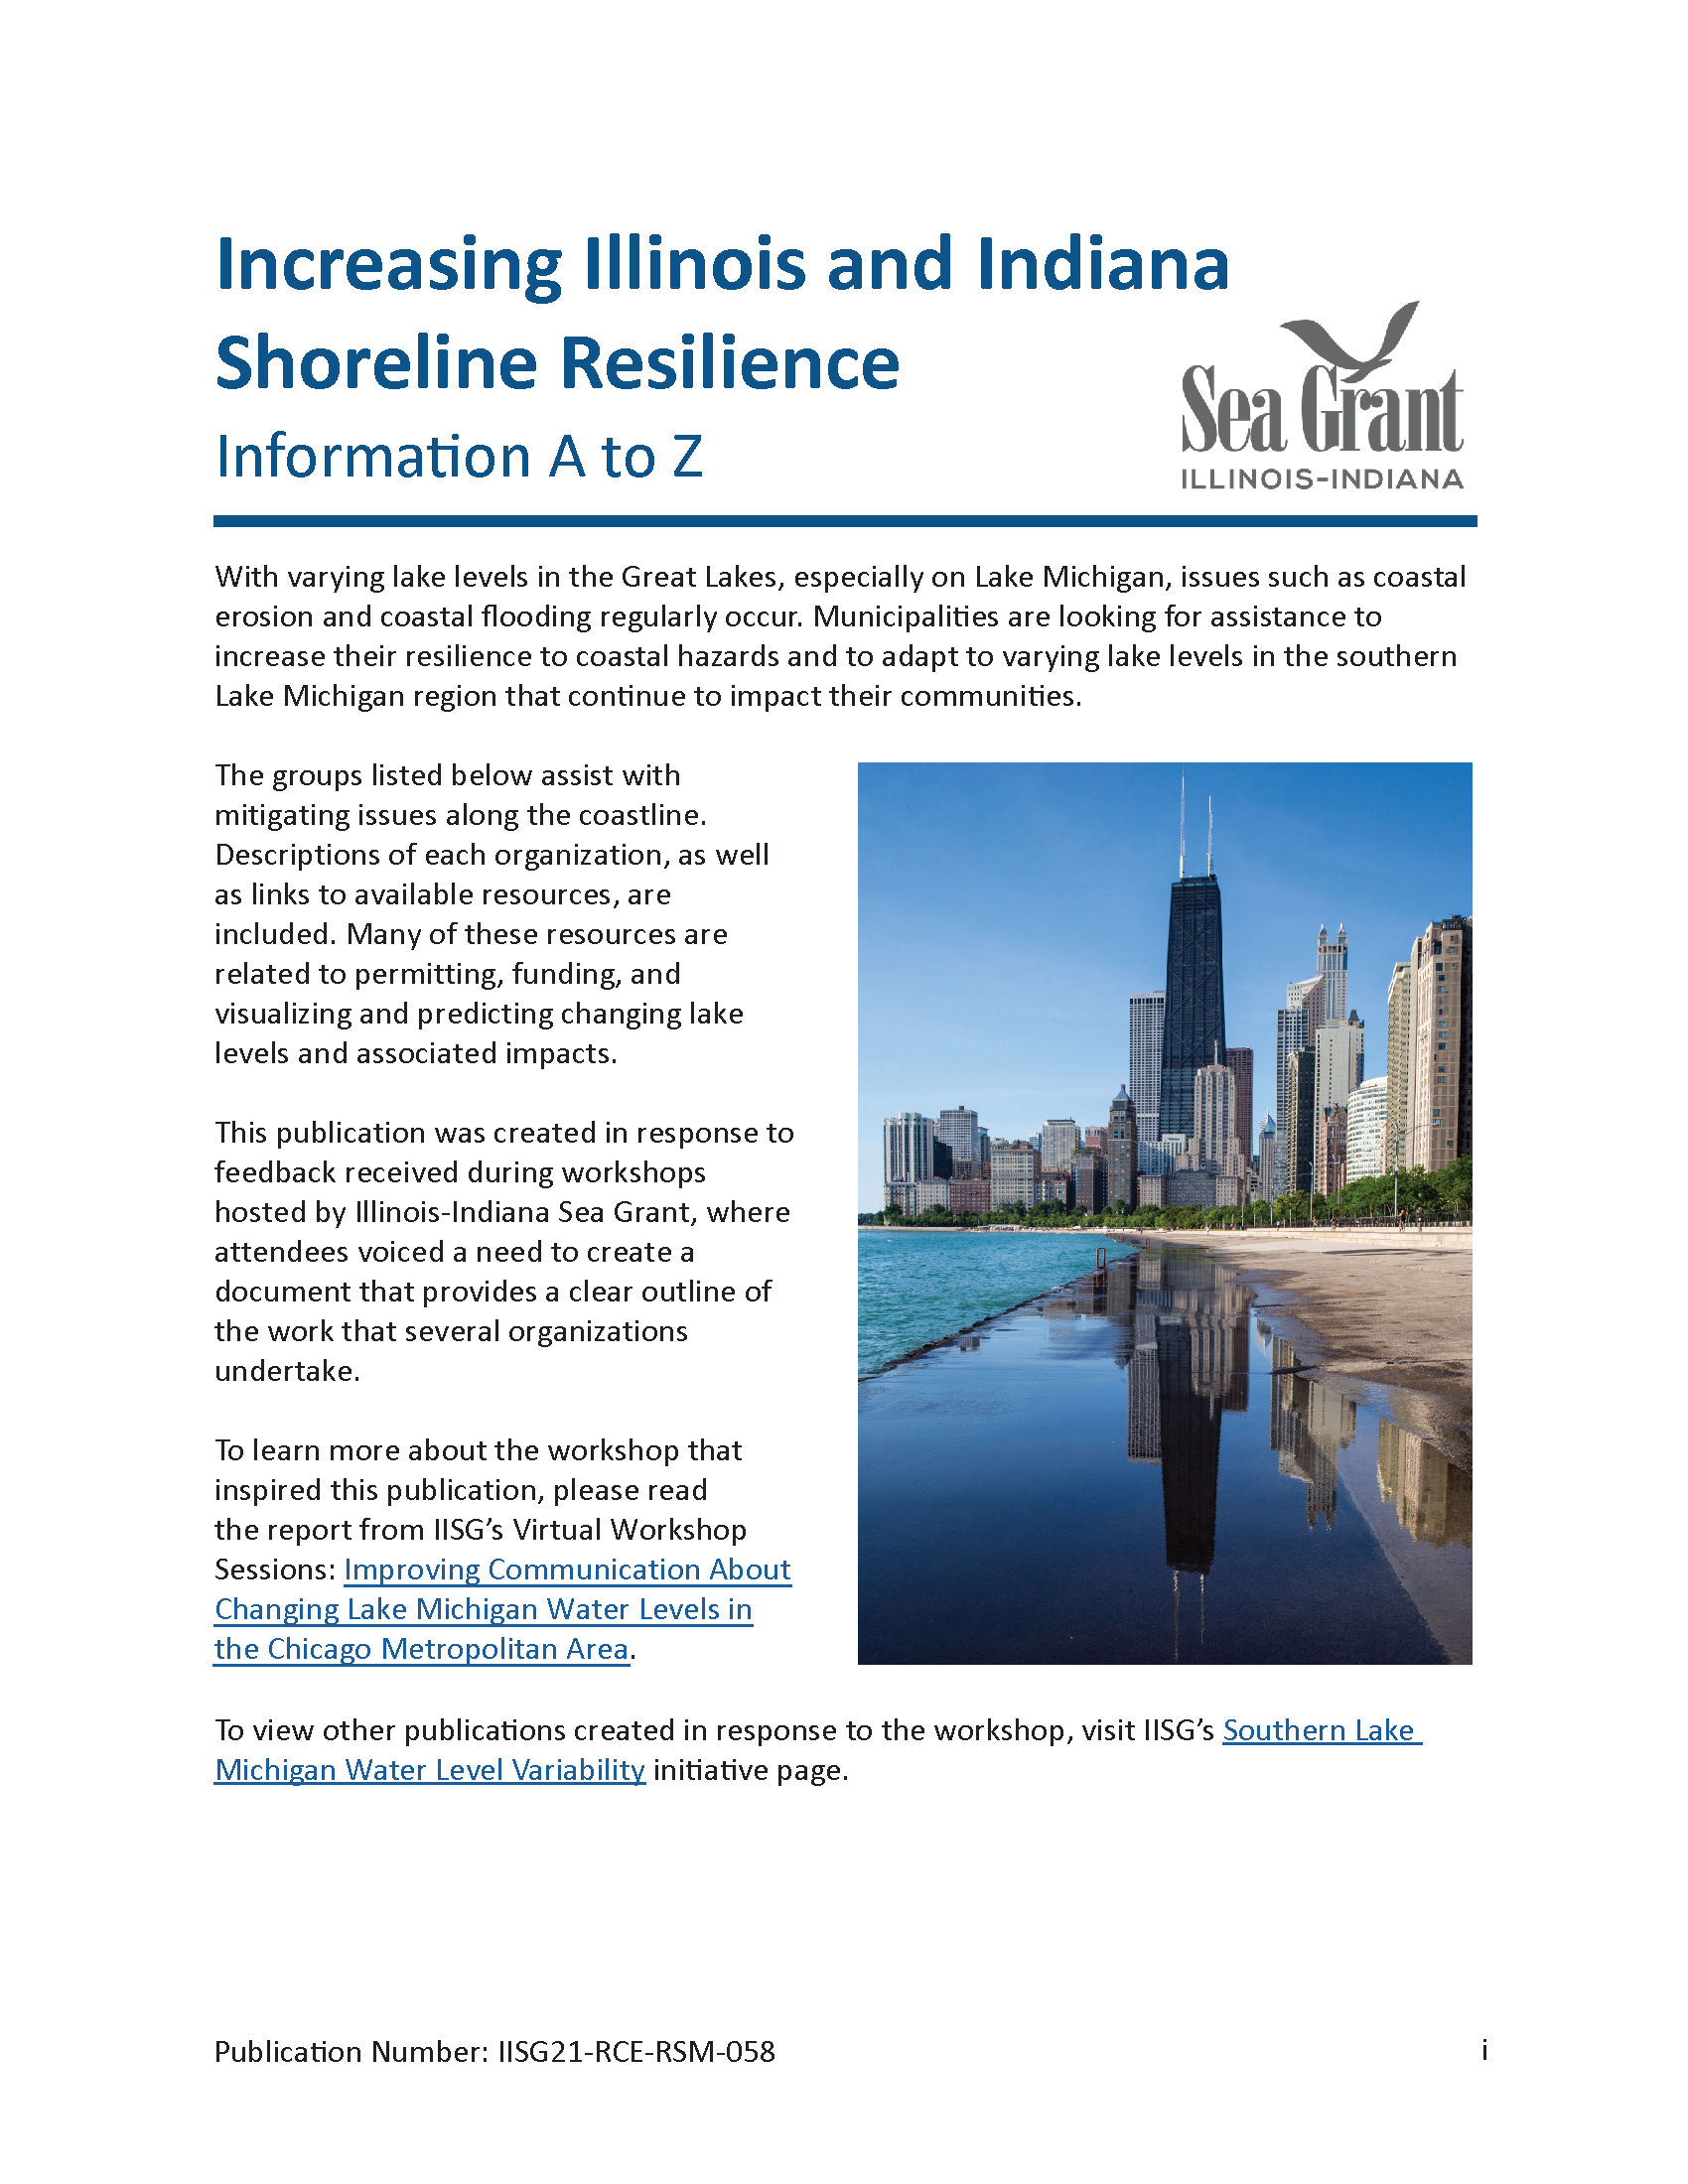 Increasing Illinois and Indiana Shoreline Resilience: Information A to Z Thumbnail